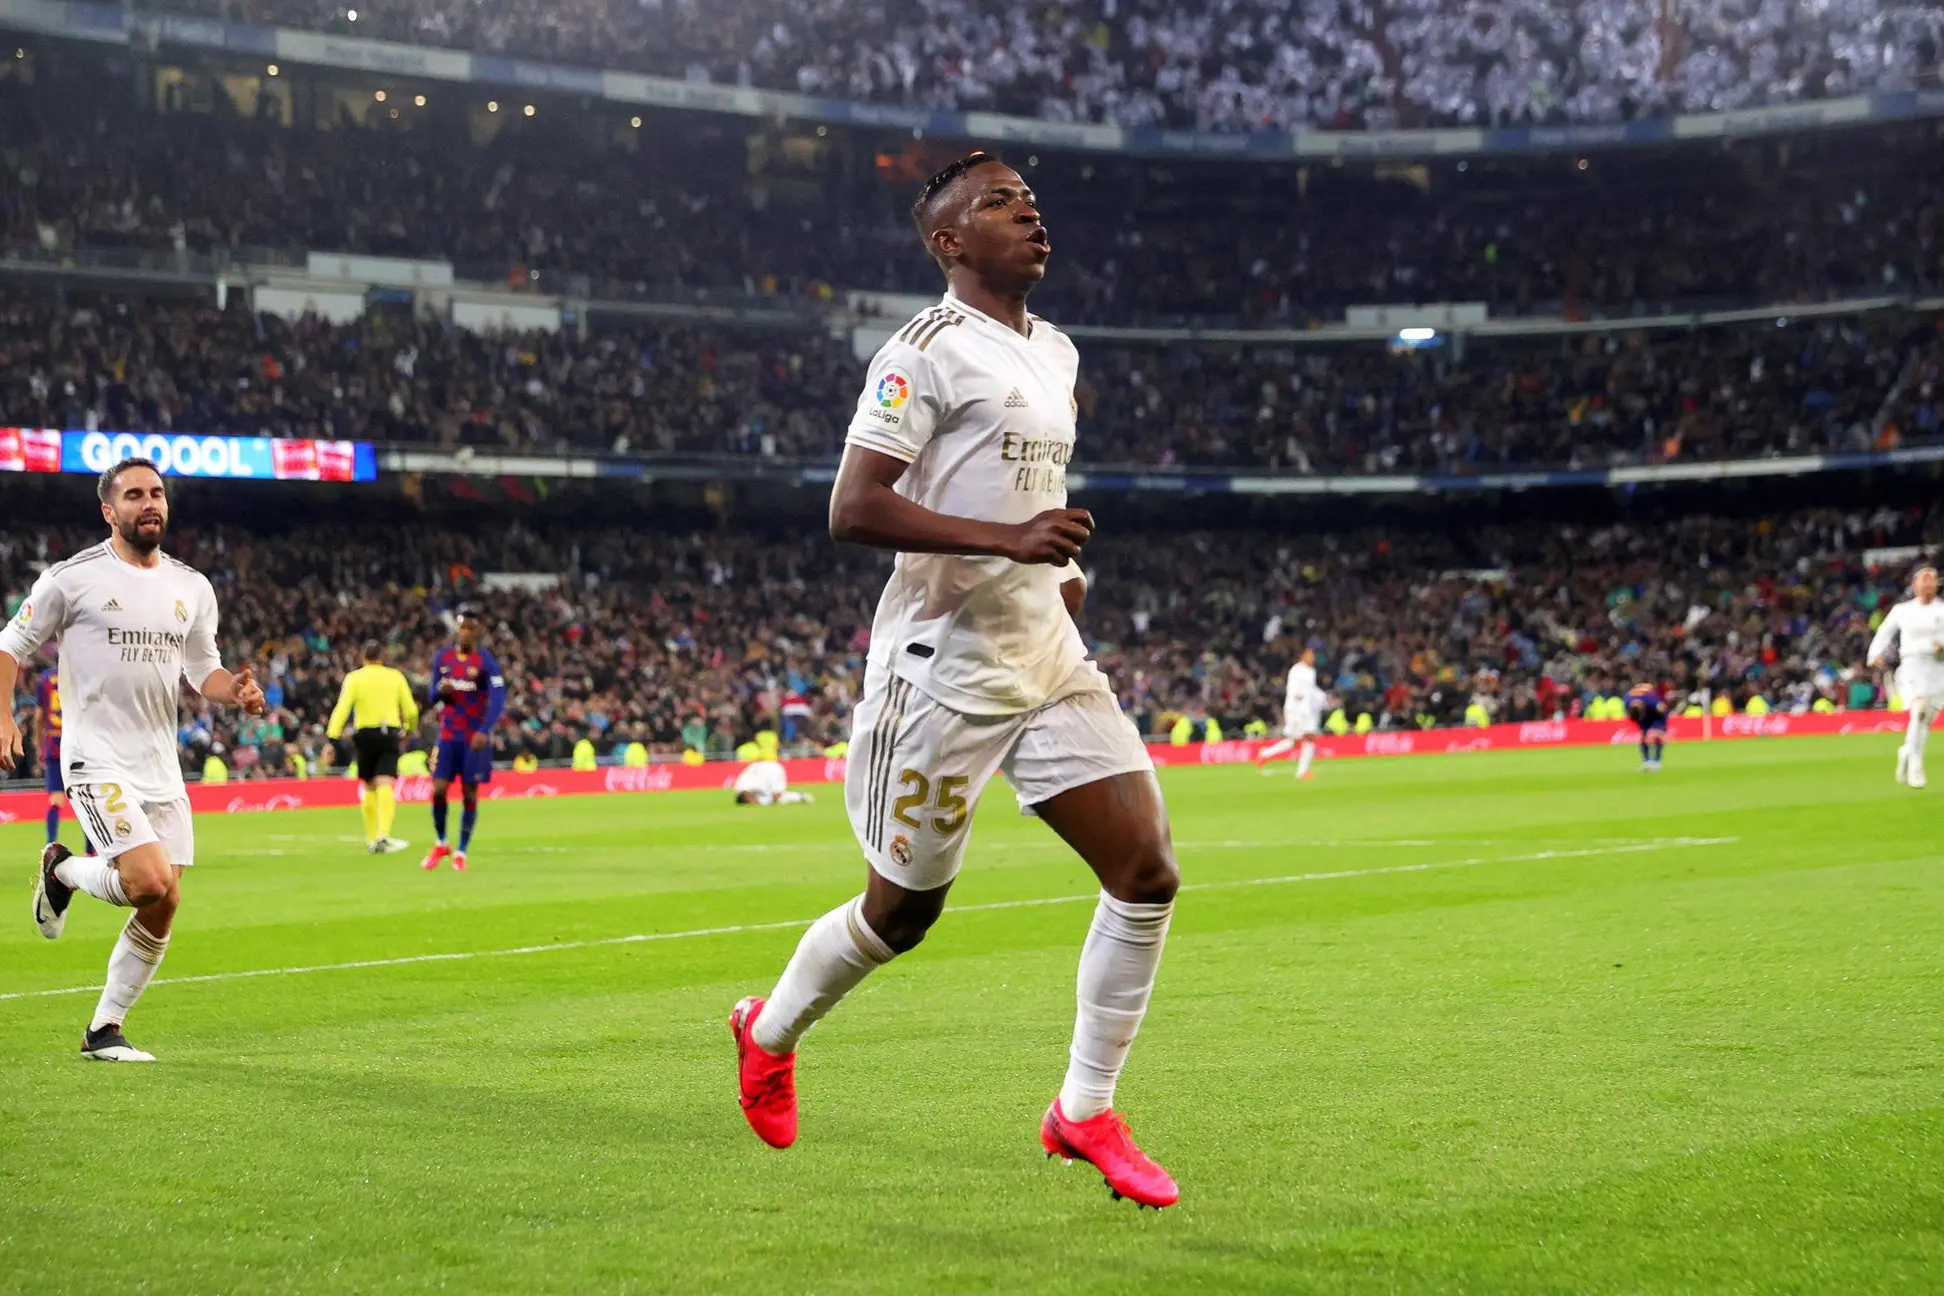 epa08263311 Real Madrid's Vinicius Junior celebrates after scoring the 1-0 lead during the Spanish La Liga soccer match between Real Madrid and FC Barcelona, traditionally known as 'El Clasico', at Santiago Bernabeu stadium in Madrid, Spain, 01 March 2020. EPA/JUANJO MARTIN